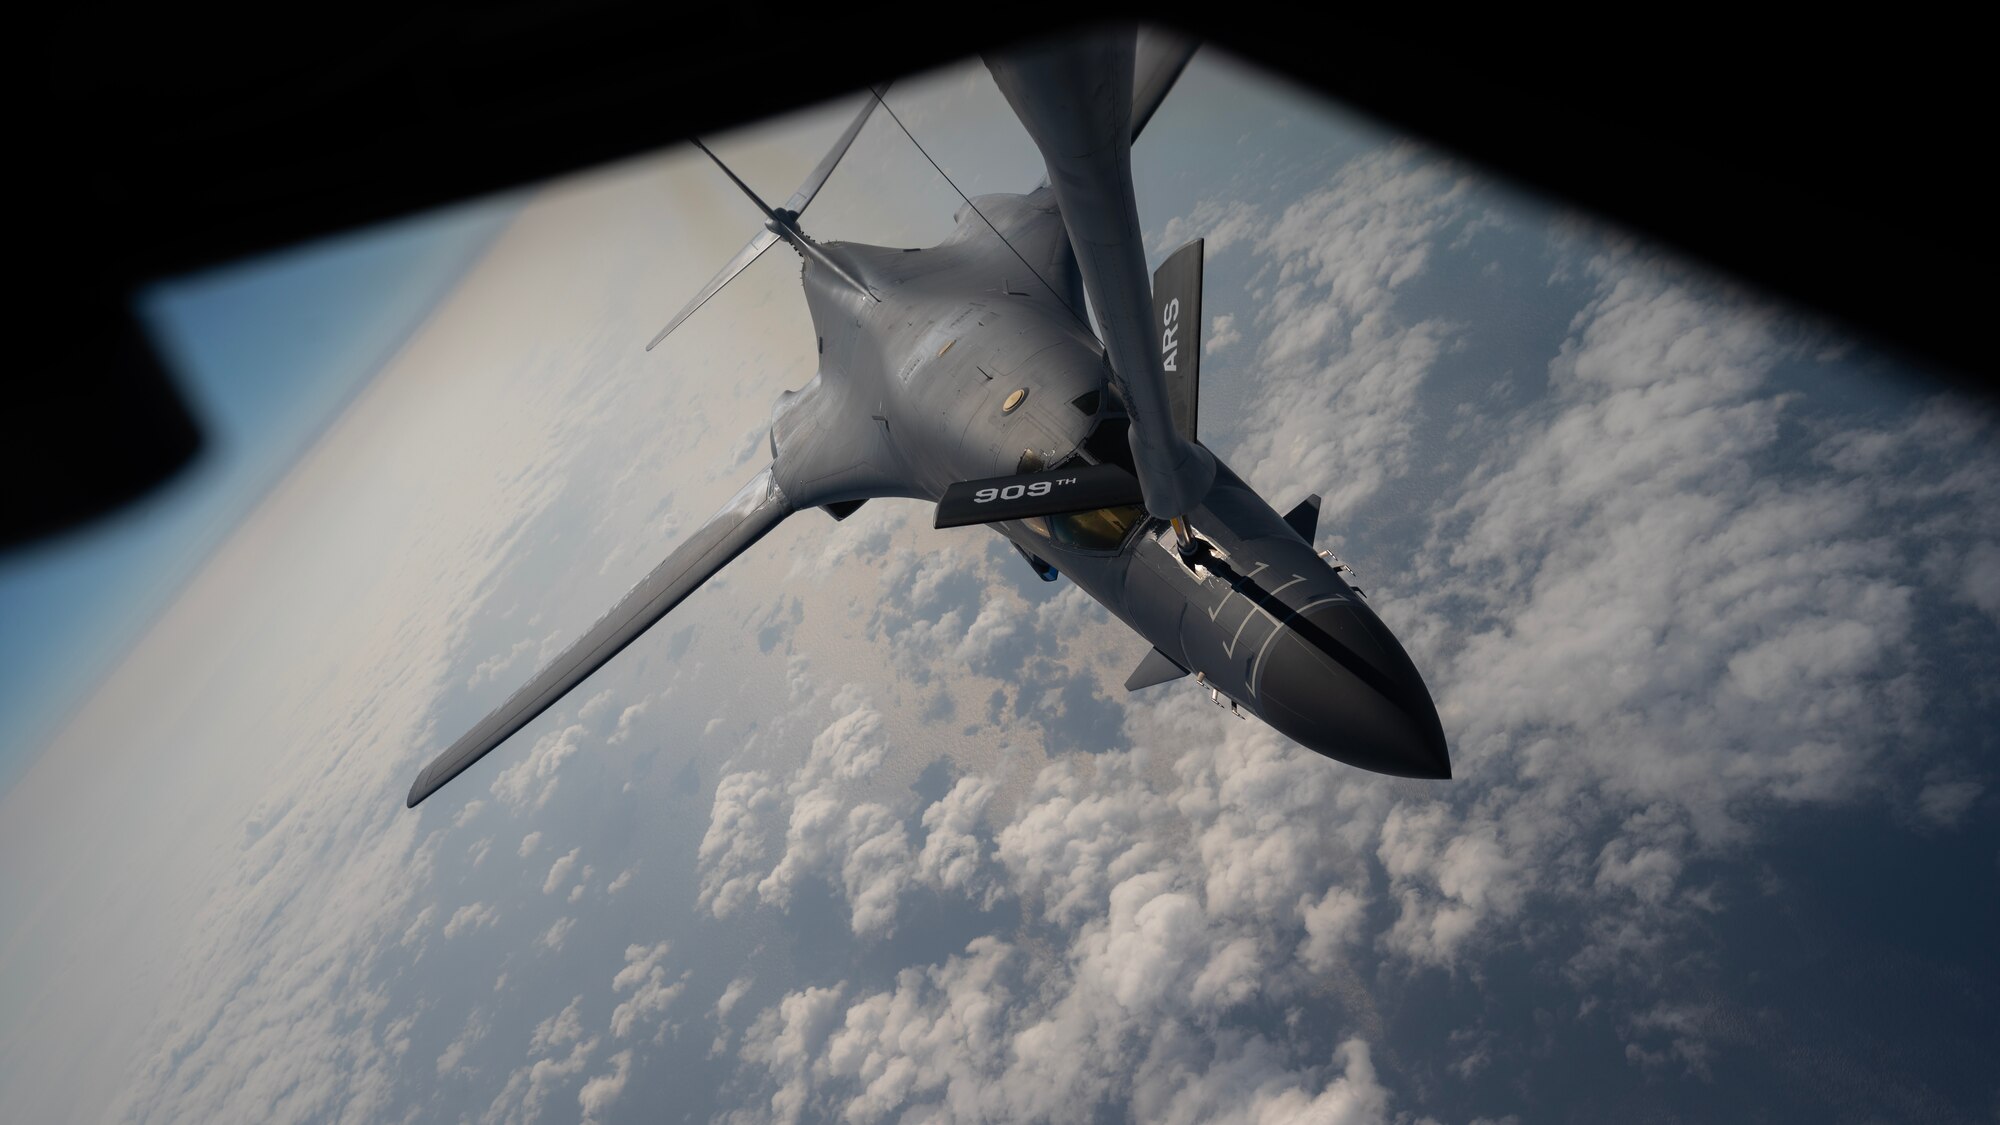 A U.S. Air Force 34th Expeditionary Bomb Squadron B-1B Lancer receives fuel from a 909th Air Refueling Squadron KC-135 Stratotanker during a flight over the Pacific Ocean, March 19, 2023. In order to provide a safe, secure, effective and ready strategic deterrent, U.S. forces must be ready to respond to regional threats. (U.S. Air Force photo by Senior Airman Jessi Roth)